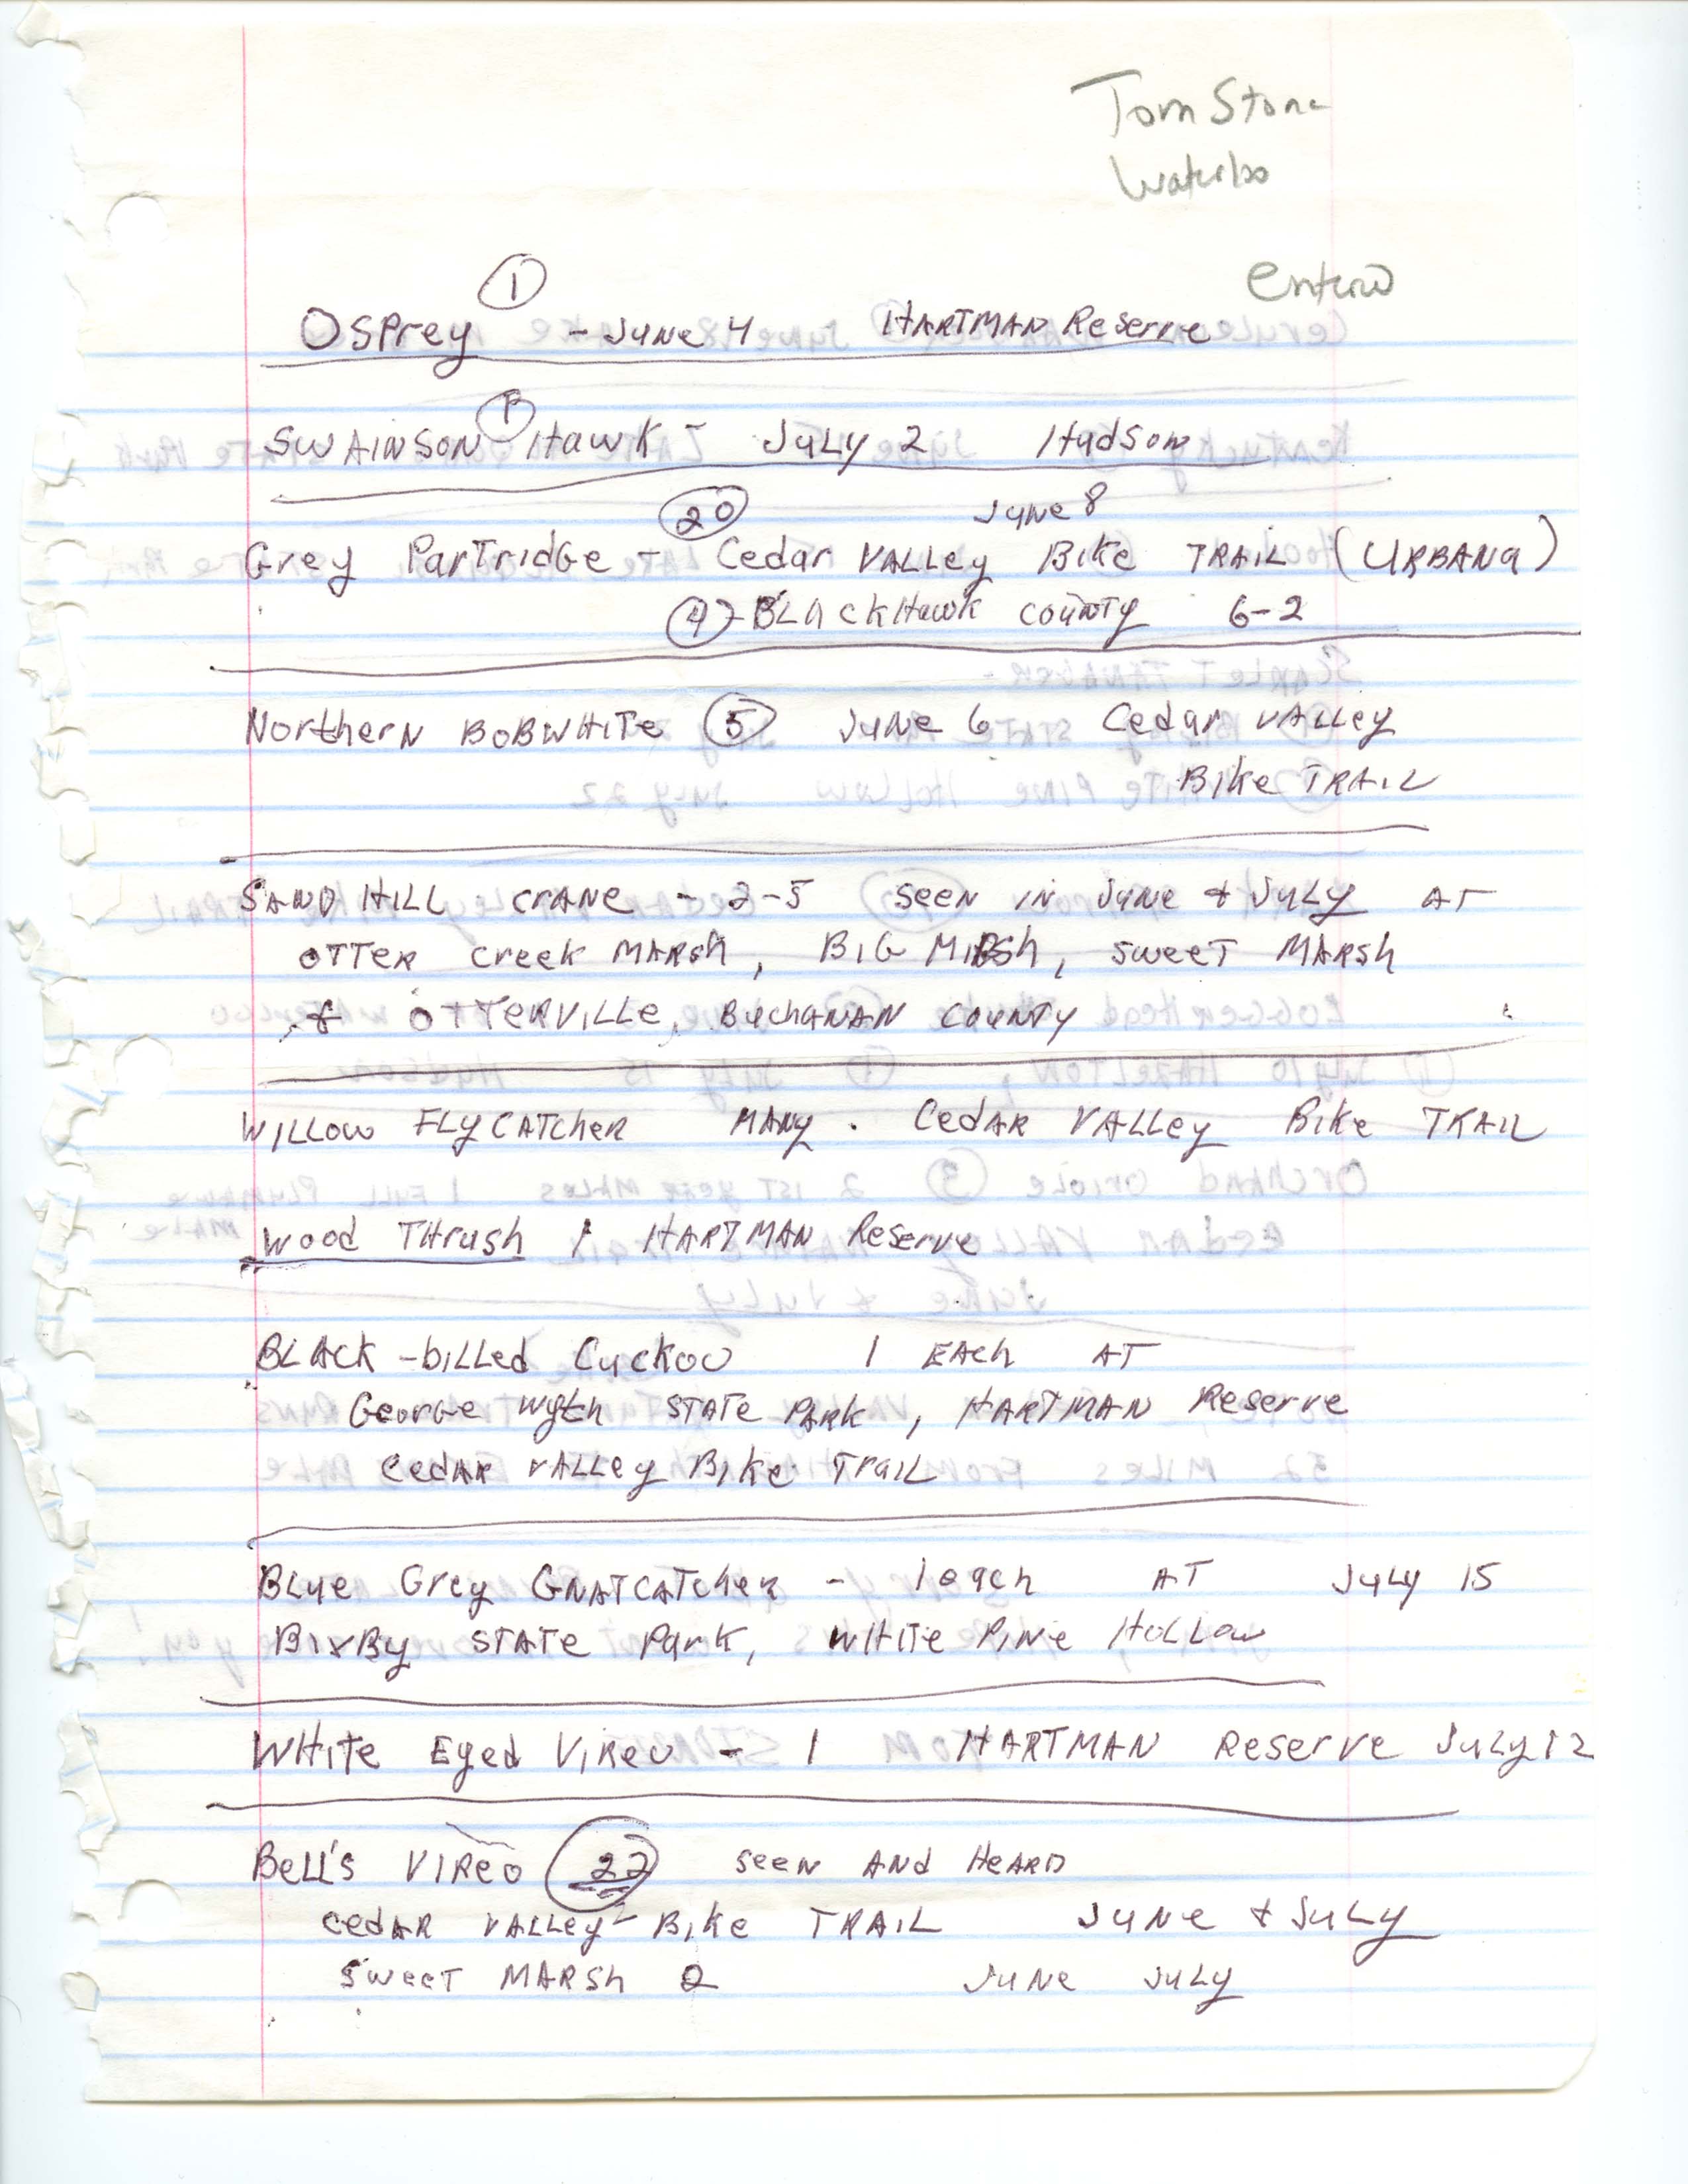 Field notes contributed by Tom Stone, summer 2002